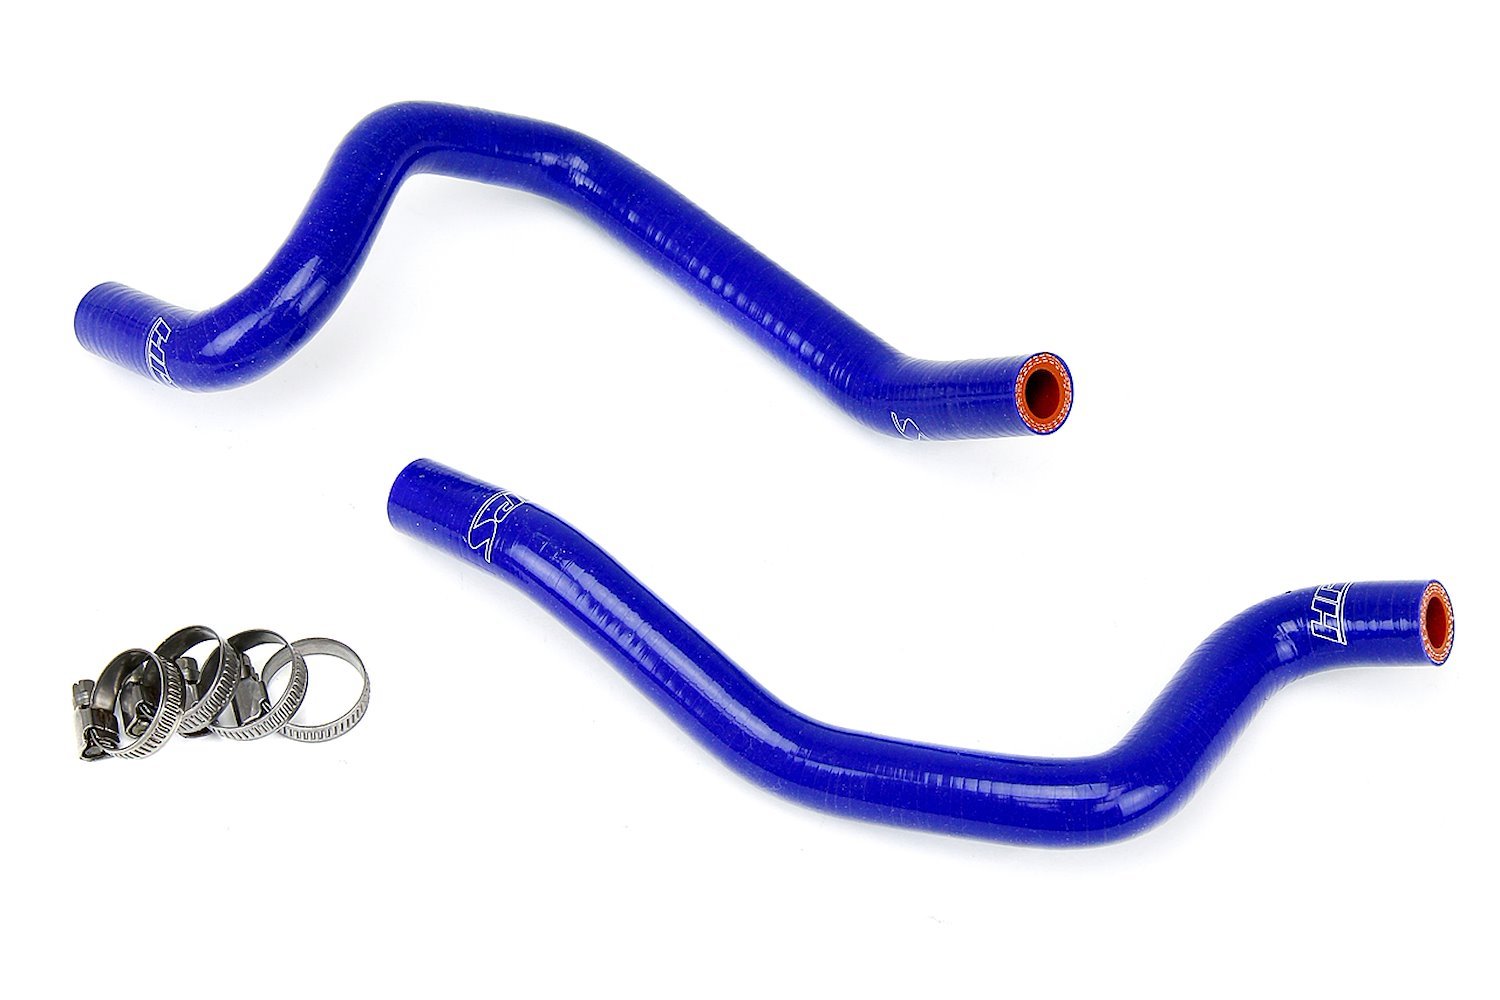 57-1802-BLUE Heater Hose Kit, 3-Ply Reinforced Silicone, Replace OEM Rubber Heater Coolant Hoses